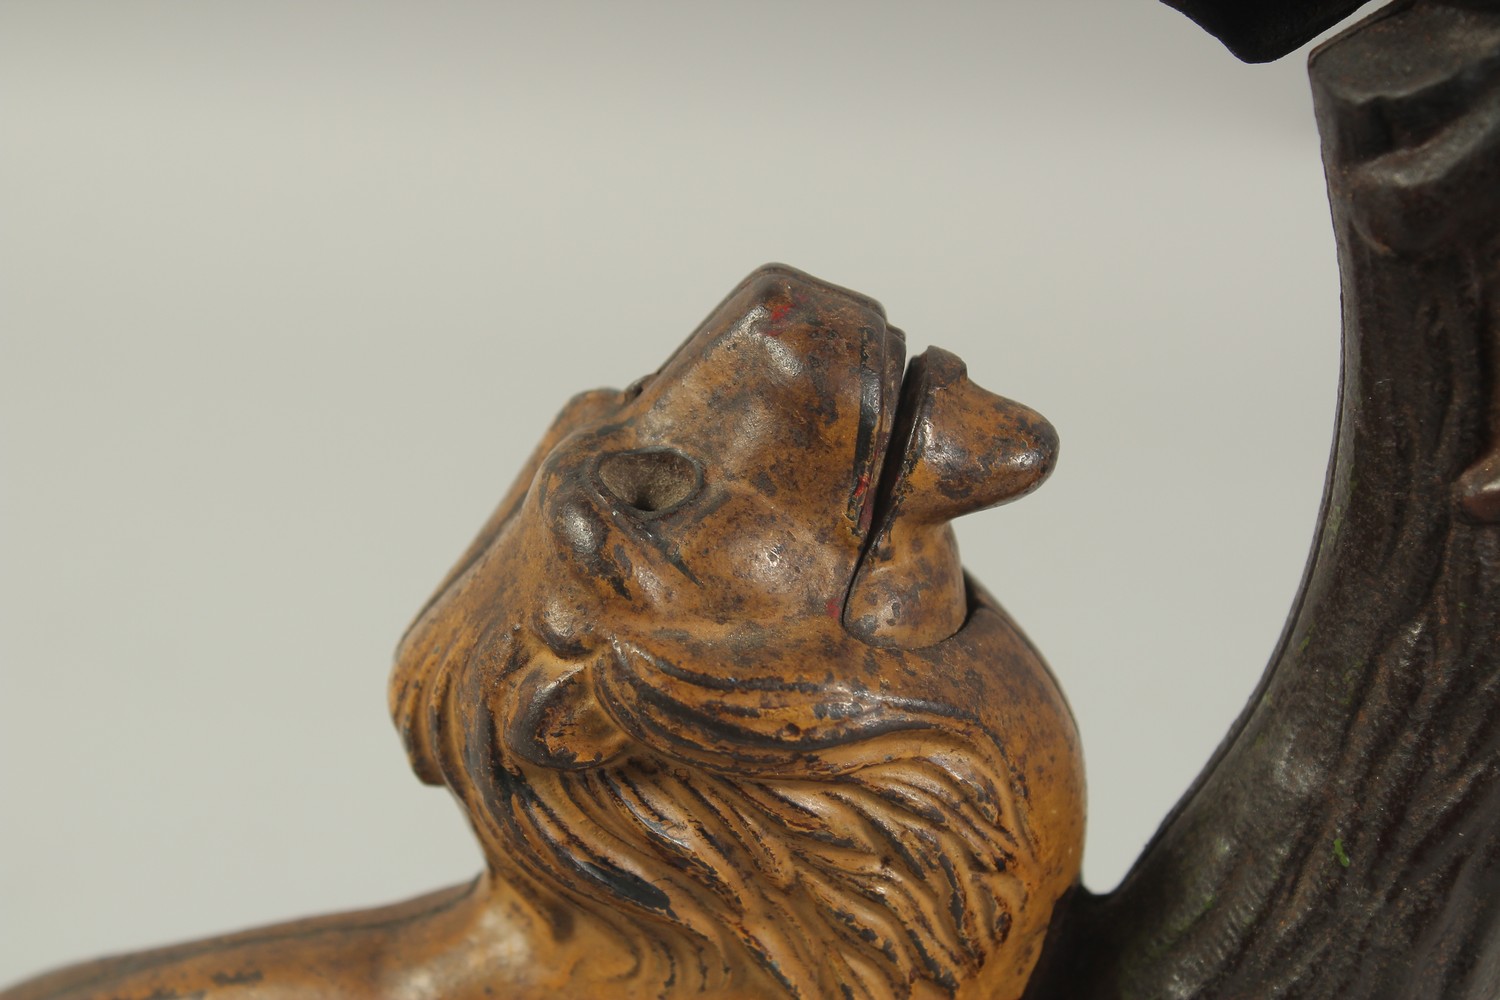 KYSER & REX CO. FRANKFORD, PENNSYLVANIA, CIRCA. 1880. A LION AND TWO MONKEYS, CAST IRON, PAINTED - Image 5 of 15